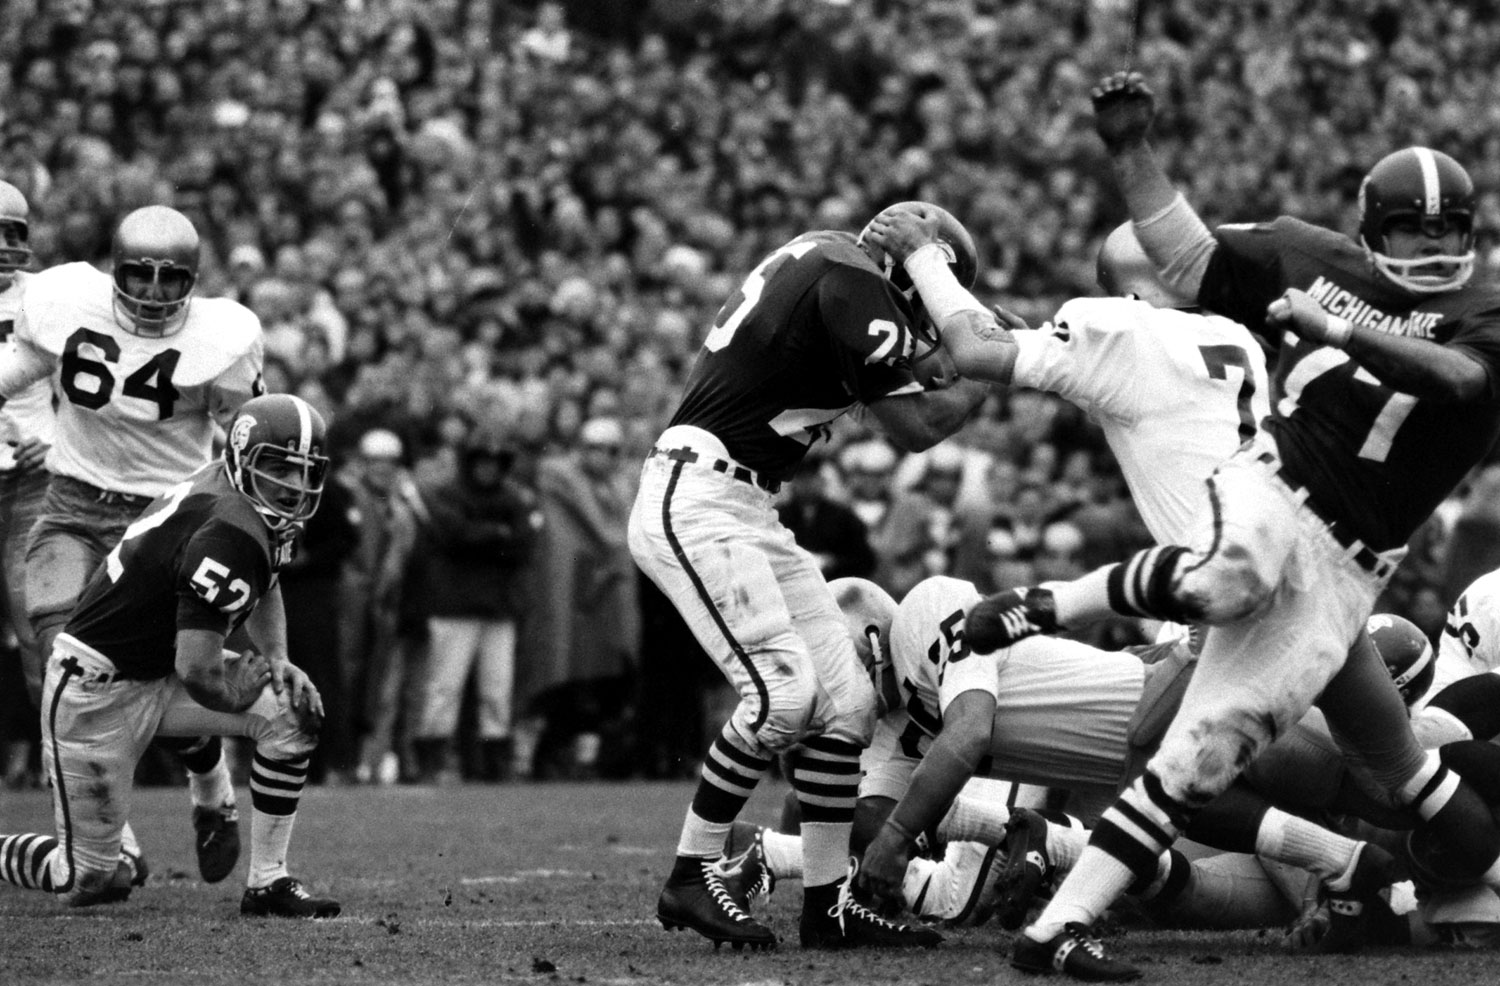 Scene from the November 1966 "Game of the Century" between Notre Dame (in white) and Michigan State.